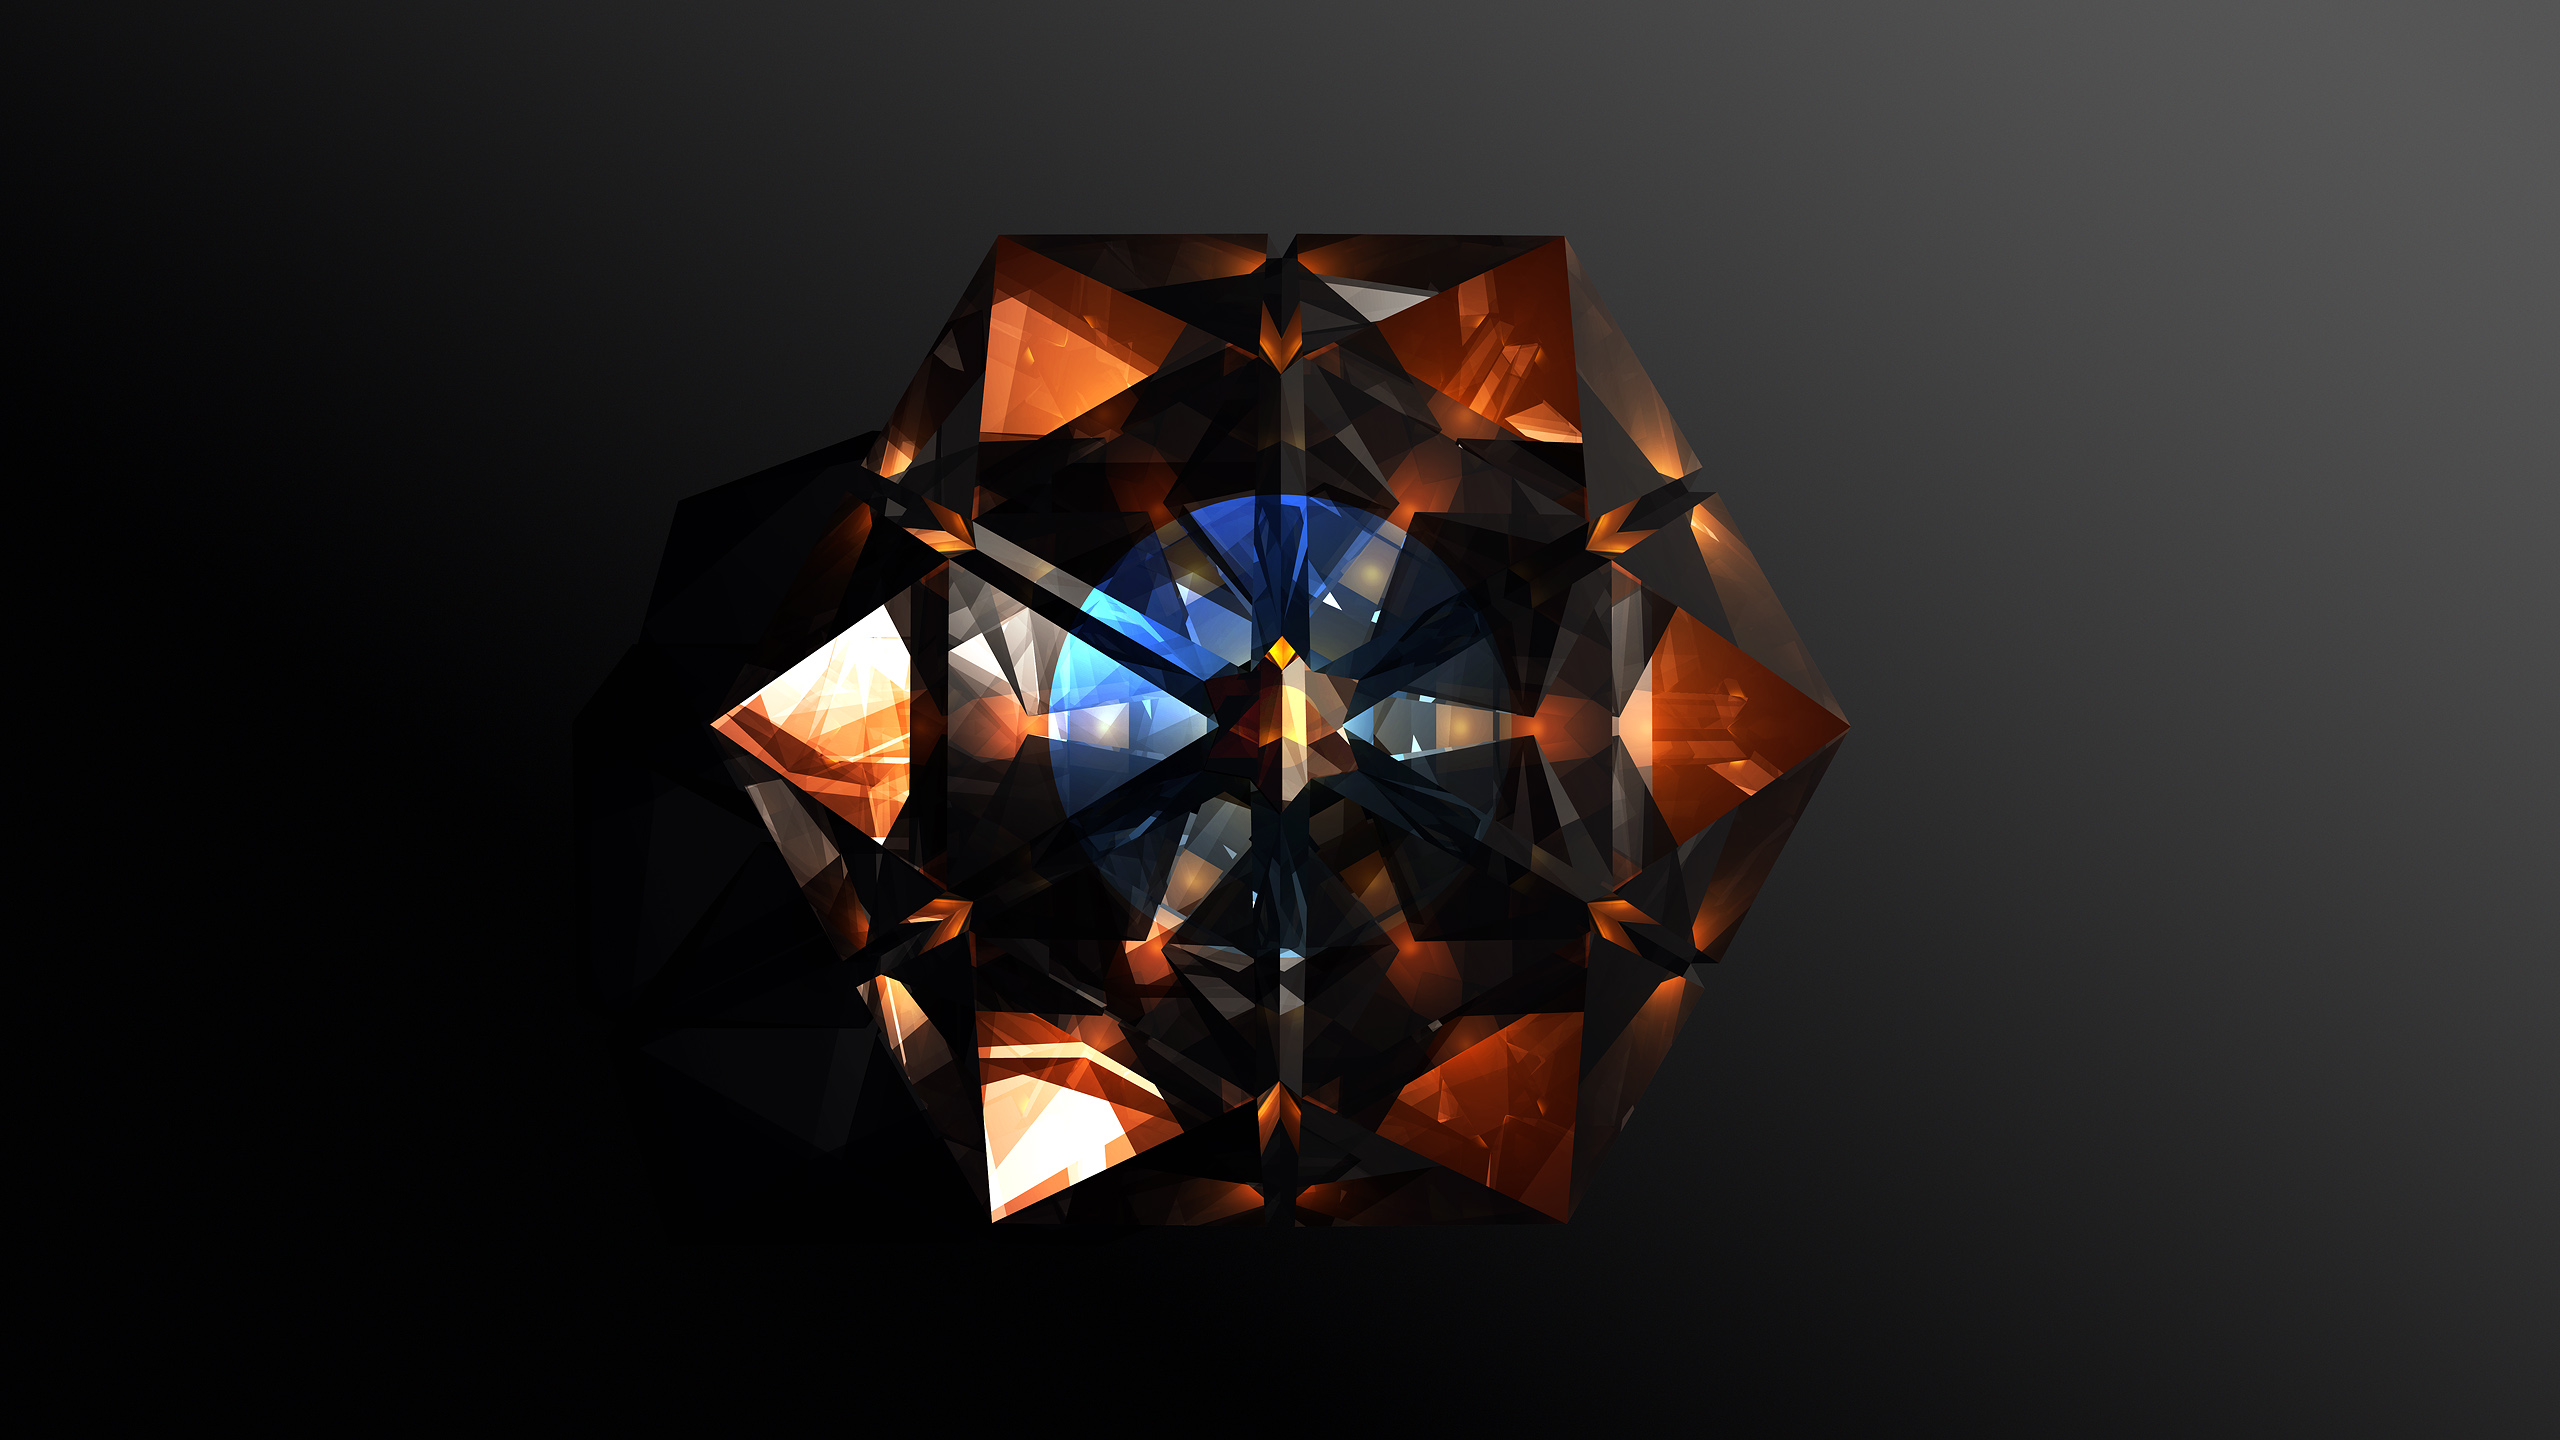 Facets HD Wallpaper | Background Image | 2560x1440 | ID ...